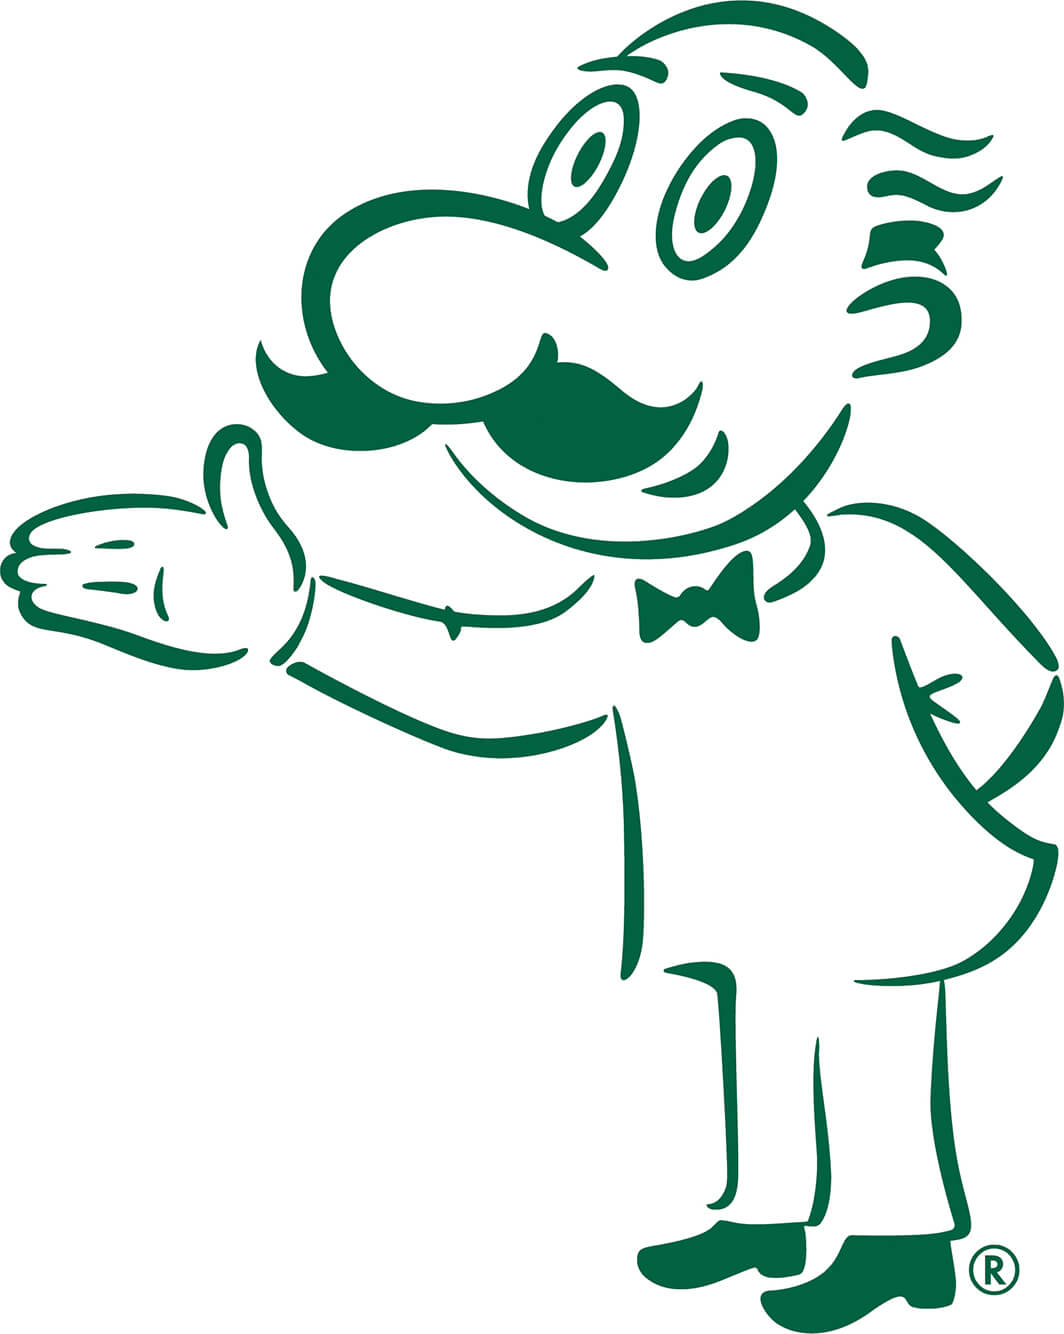 Luigi says pick your date and time!